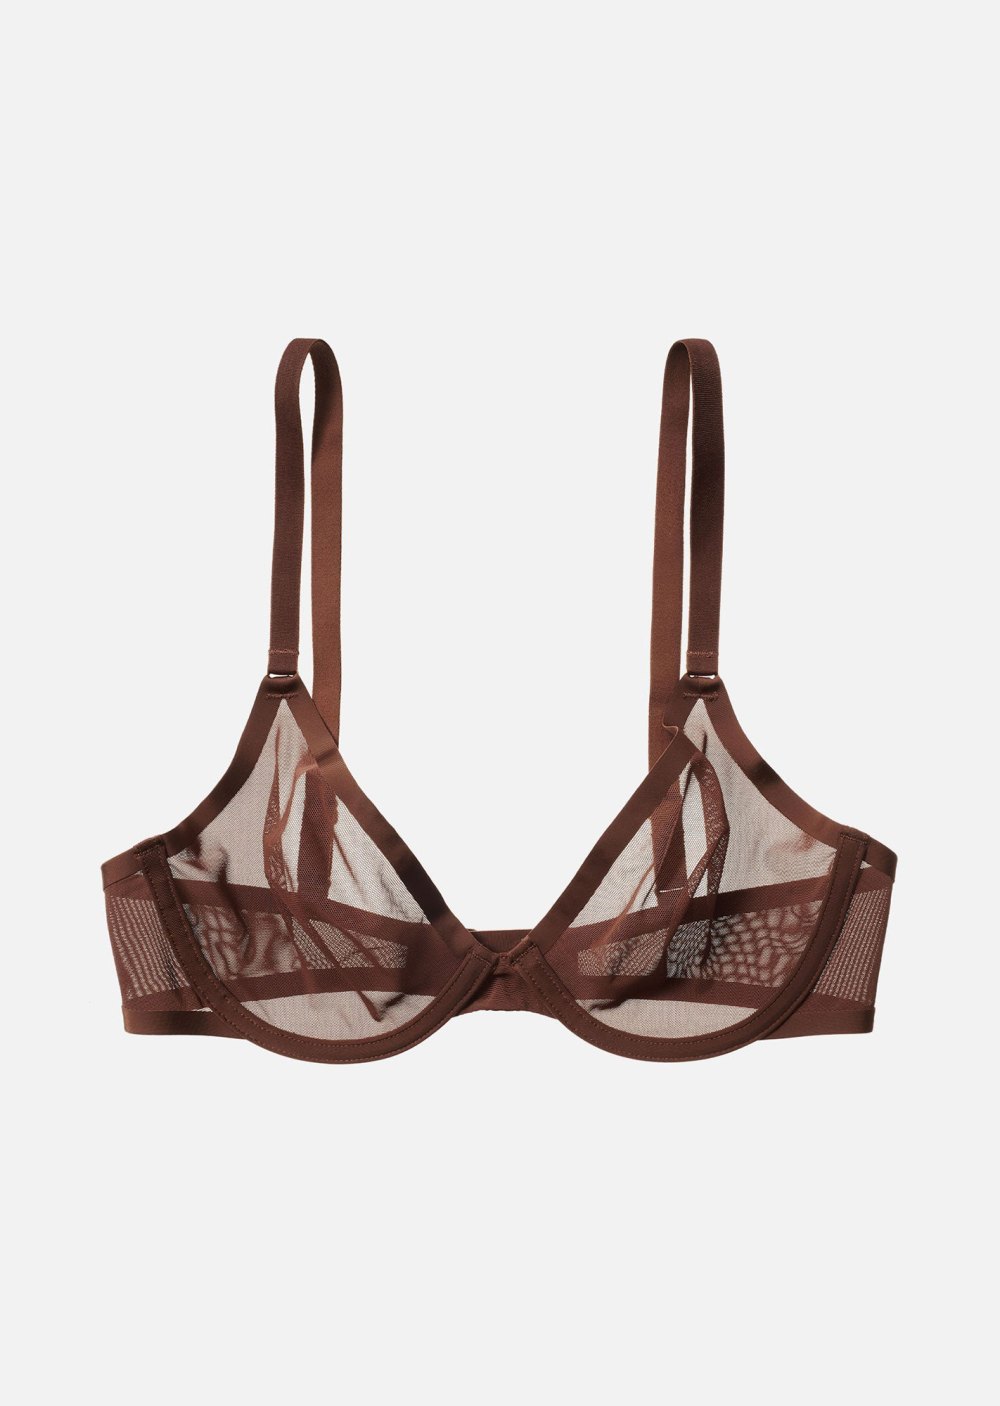 Shop Bras, Underwear and Robes From CUUP on Sale